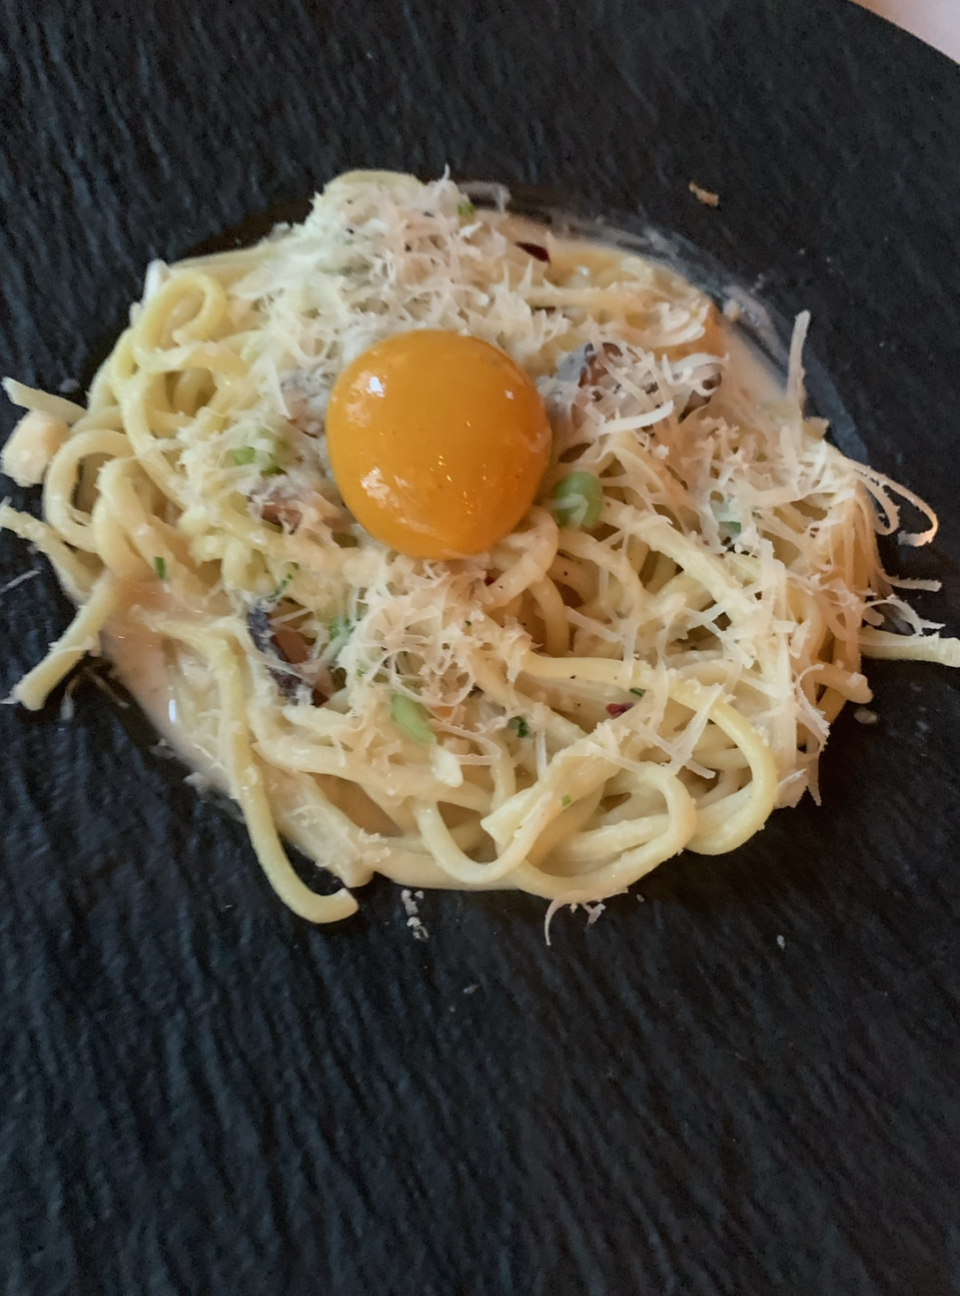 No, that's not a real egg: It's the pasta carbonara from plant-based restaurant Crossroads Kitchen, and it's made of a tomato. 